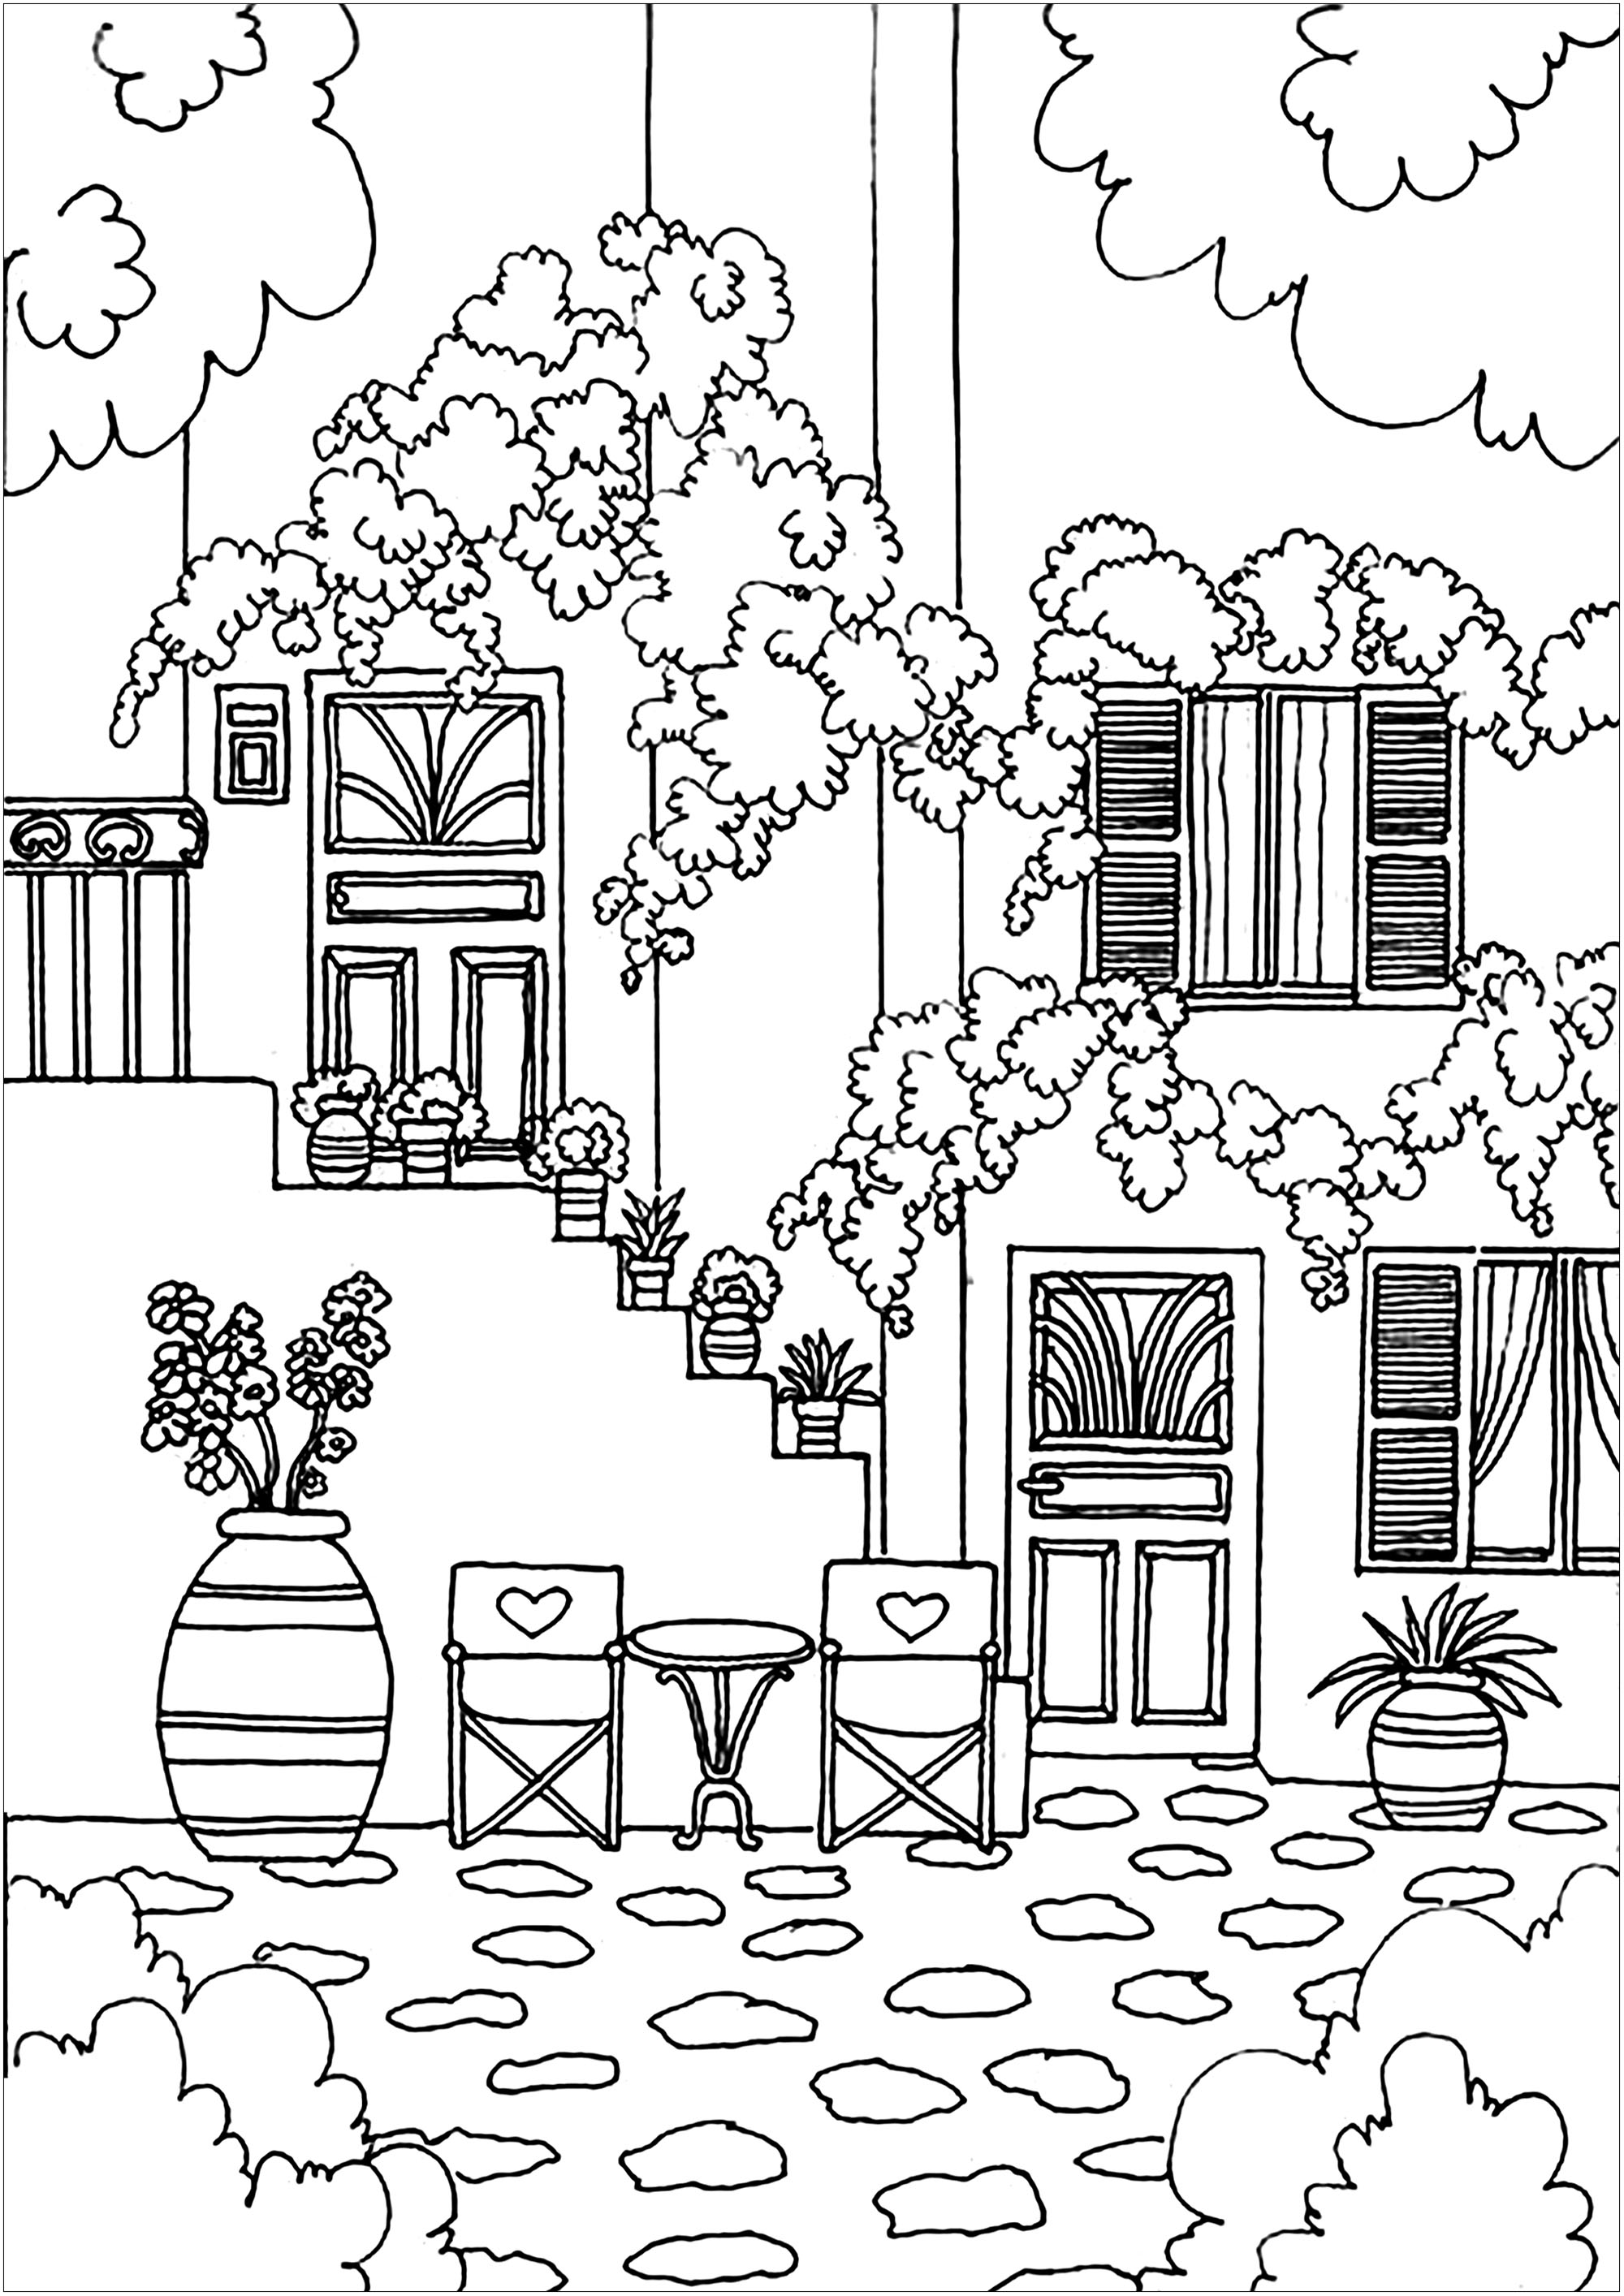 Download Greek house - Architecture Adult Coloring Pages